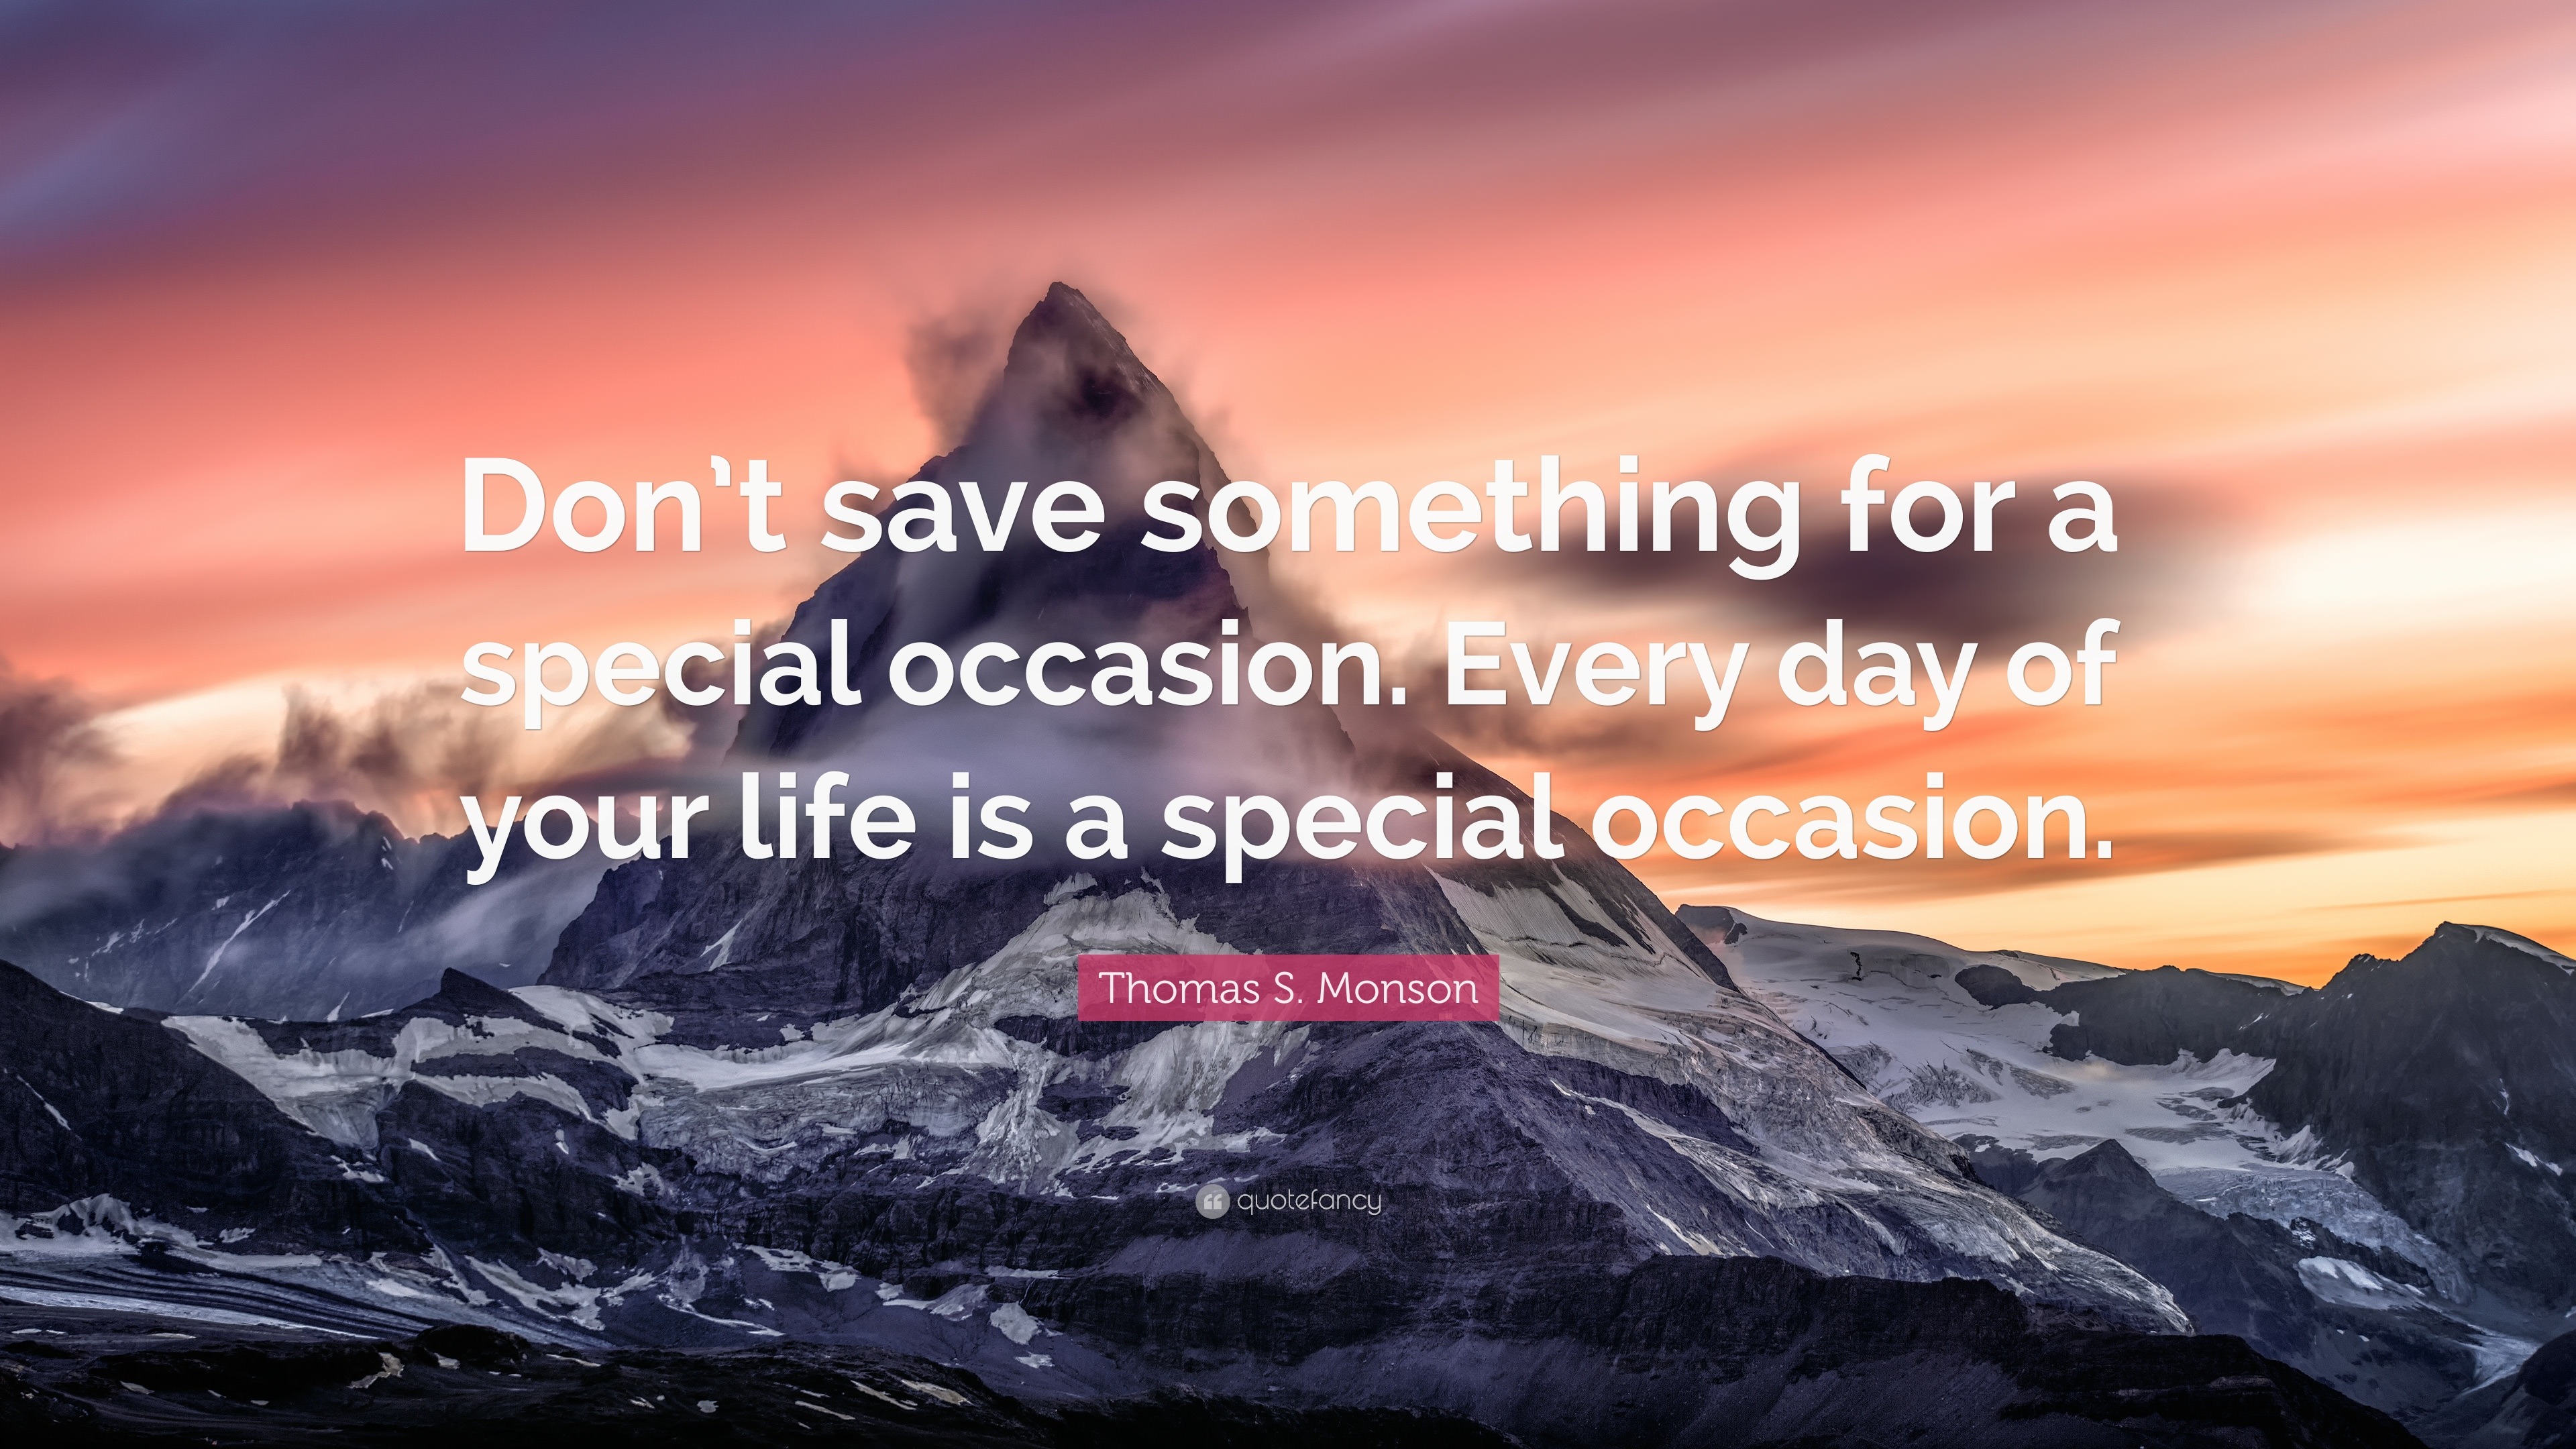 https://quotefancy.com/media/wallpaper/3840x2160/1728172-Thomas-S-Monson-Quote-Don-t-save-something-for-a-special-occasion.jpg